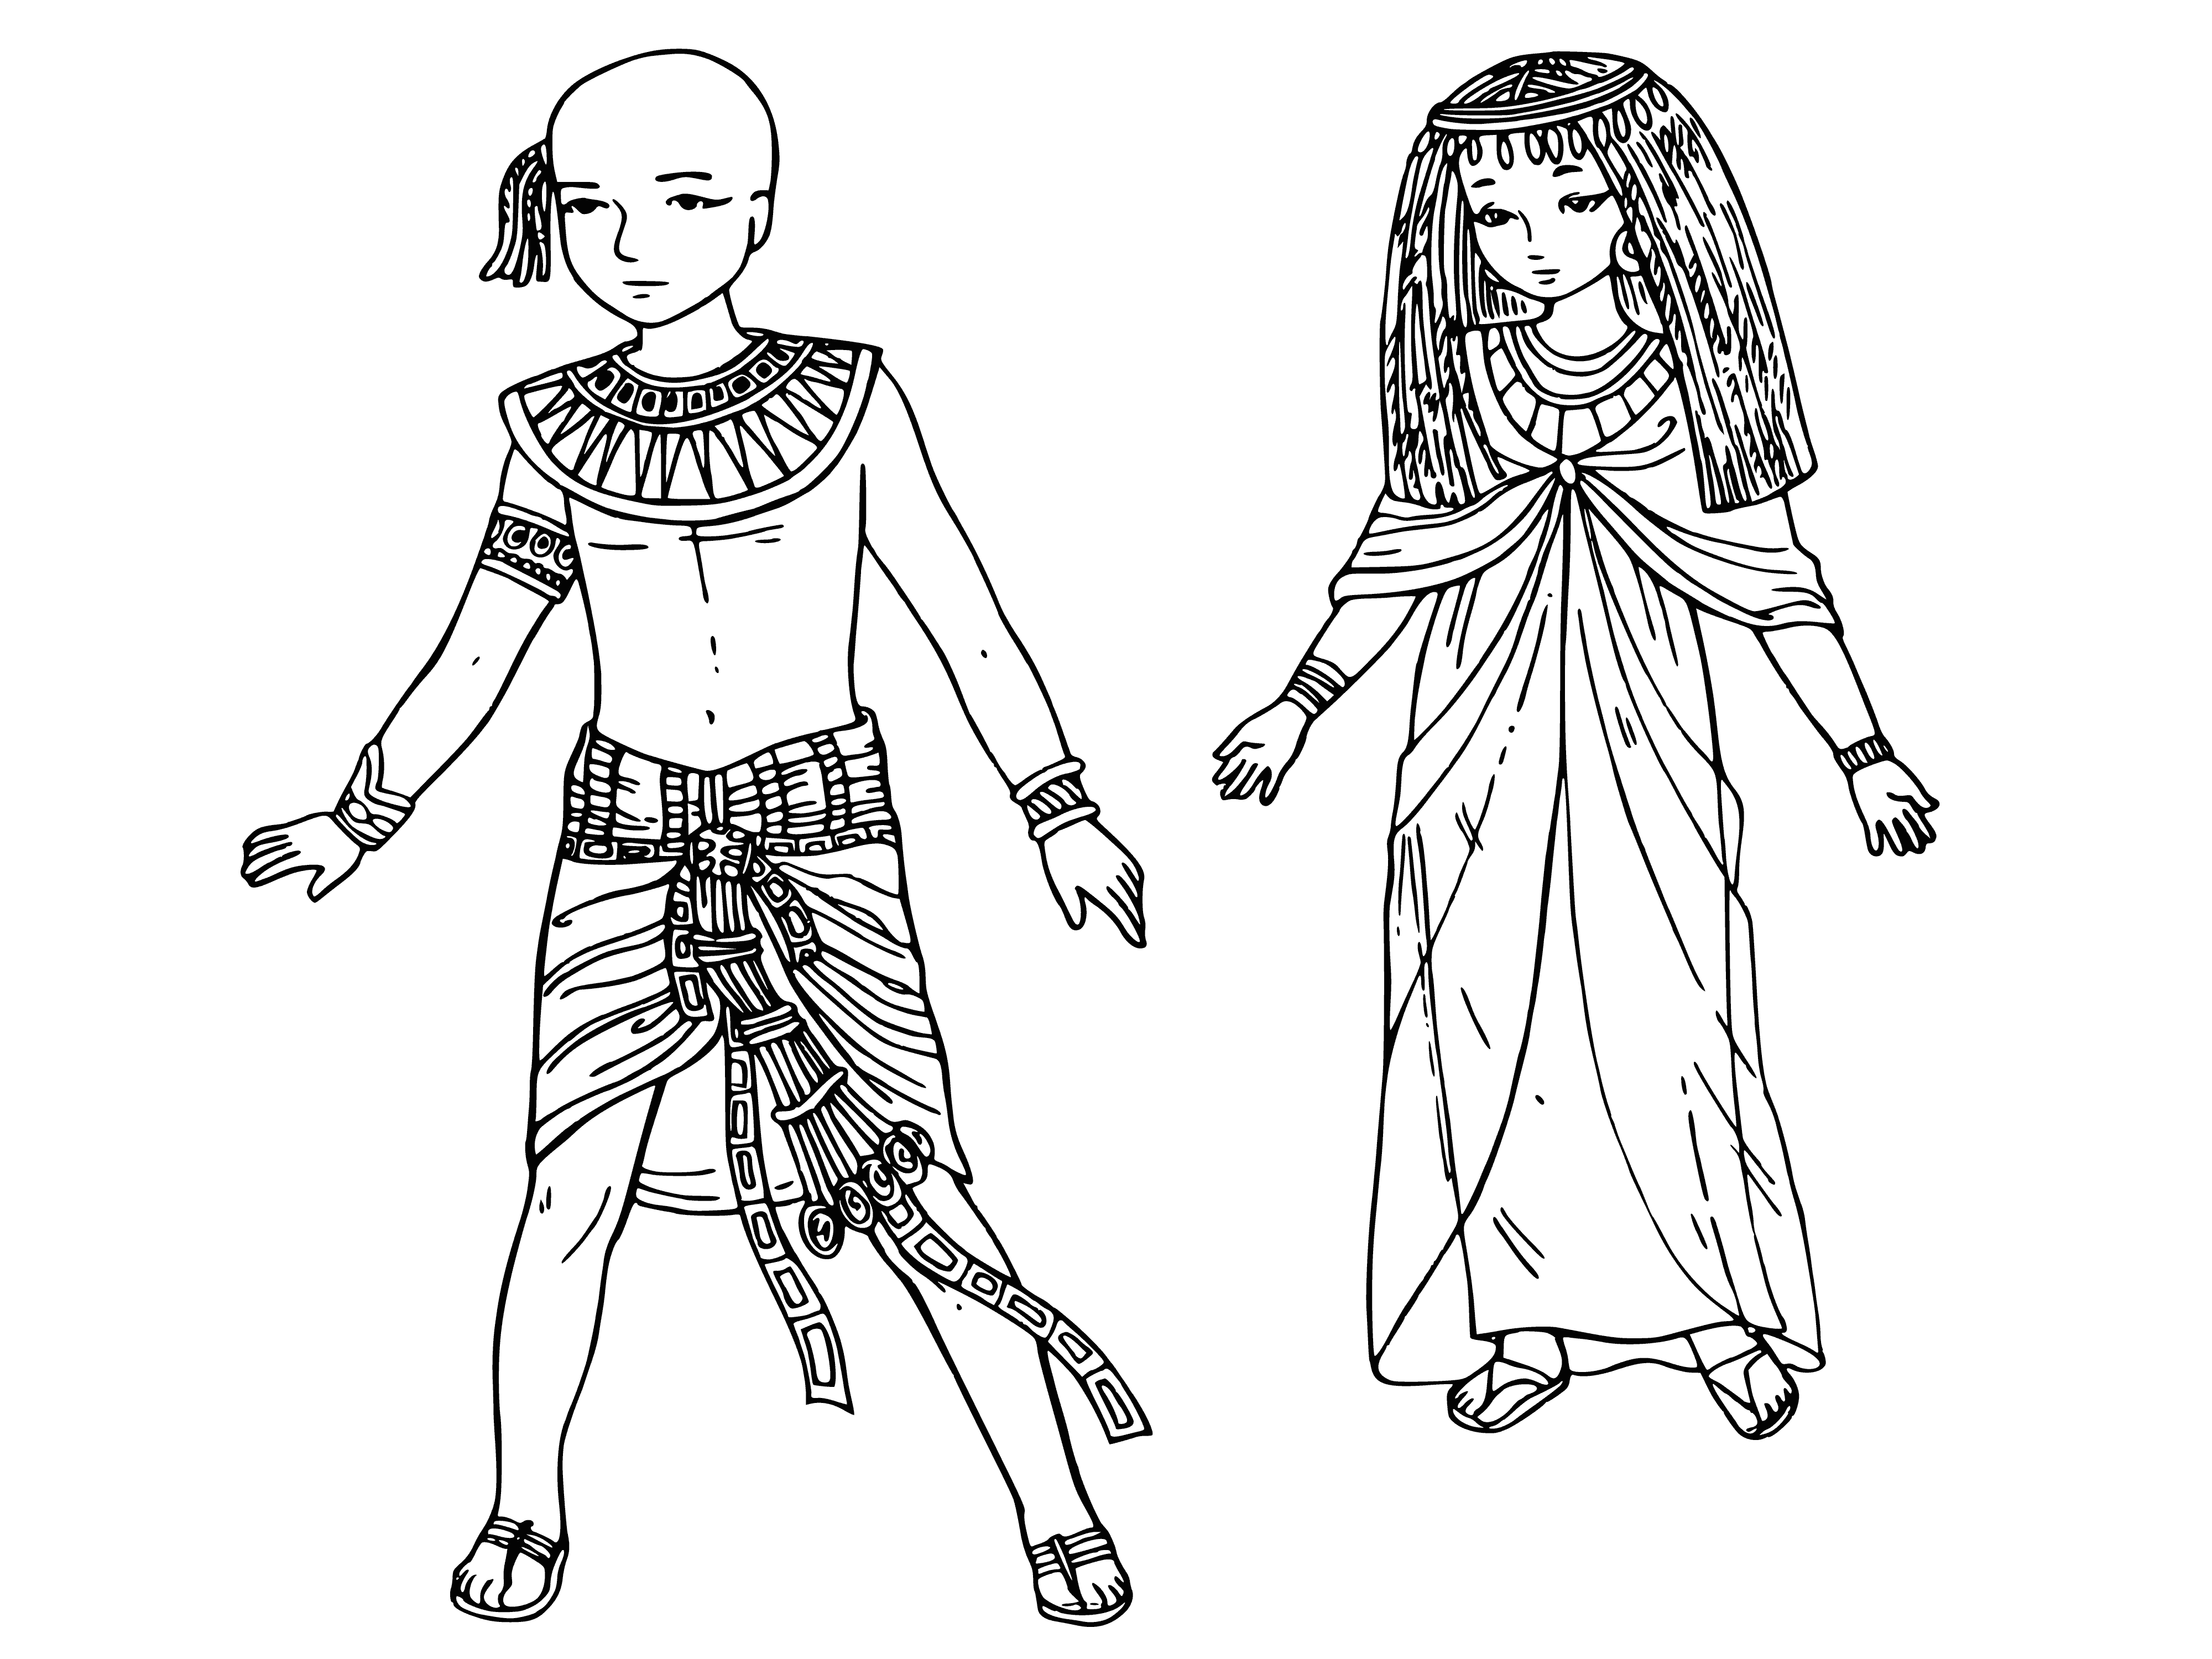 coloring page: Two Egyptian children, shirtless & wearing kilts, gold headbands, staff. 1 w/ gold cape, both w/ sandals. #Egyptian #ColoringPage